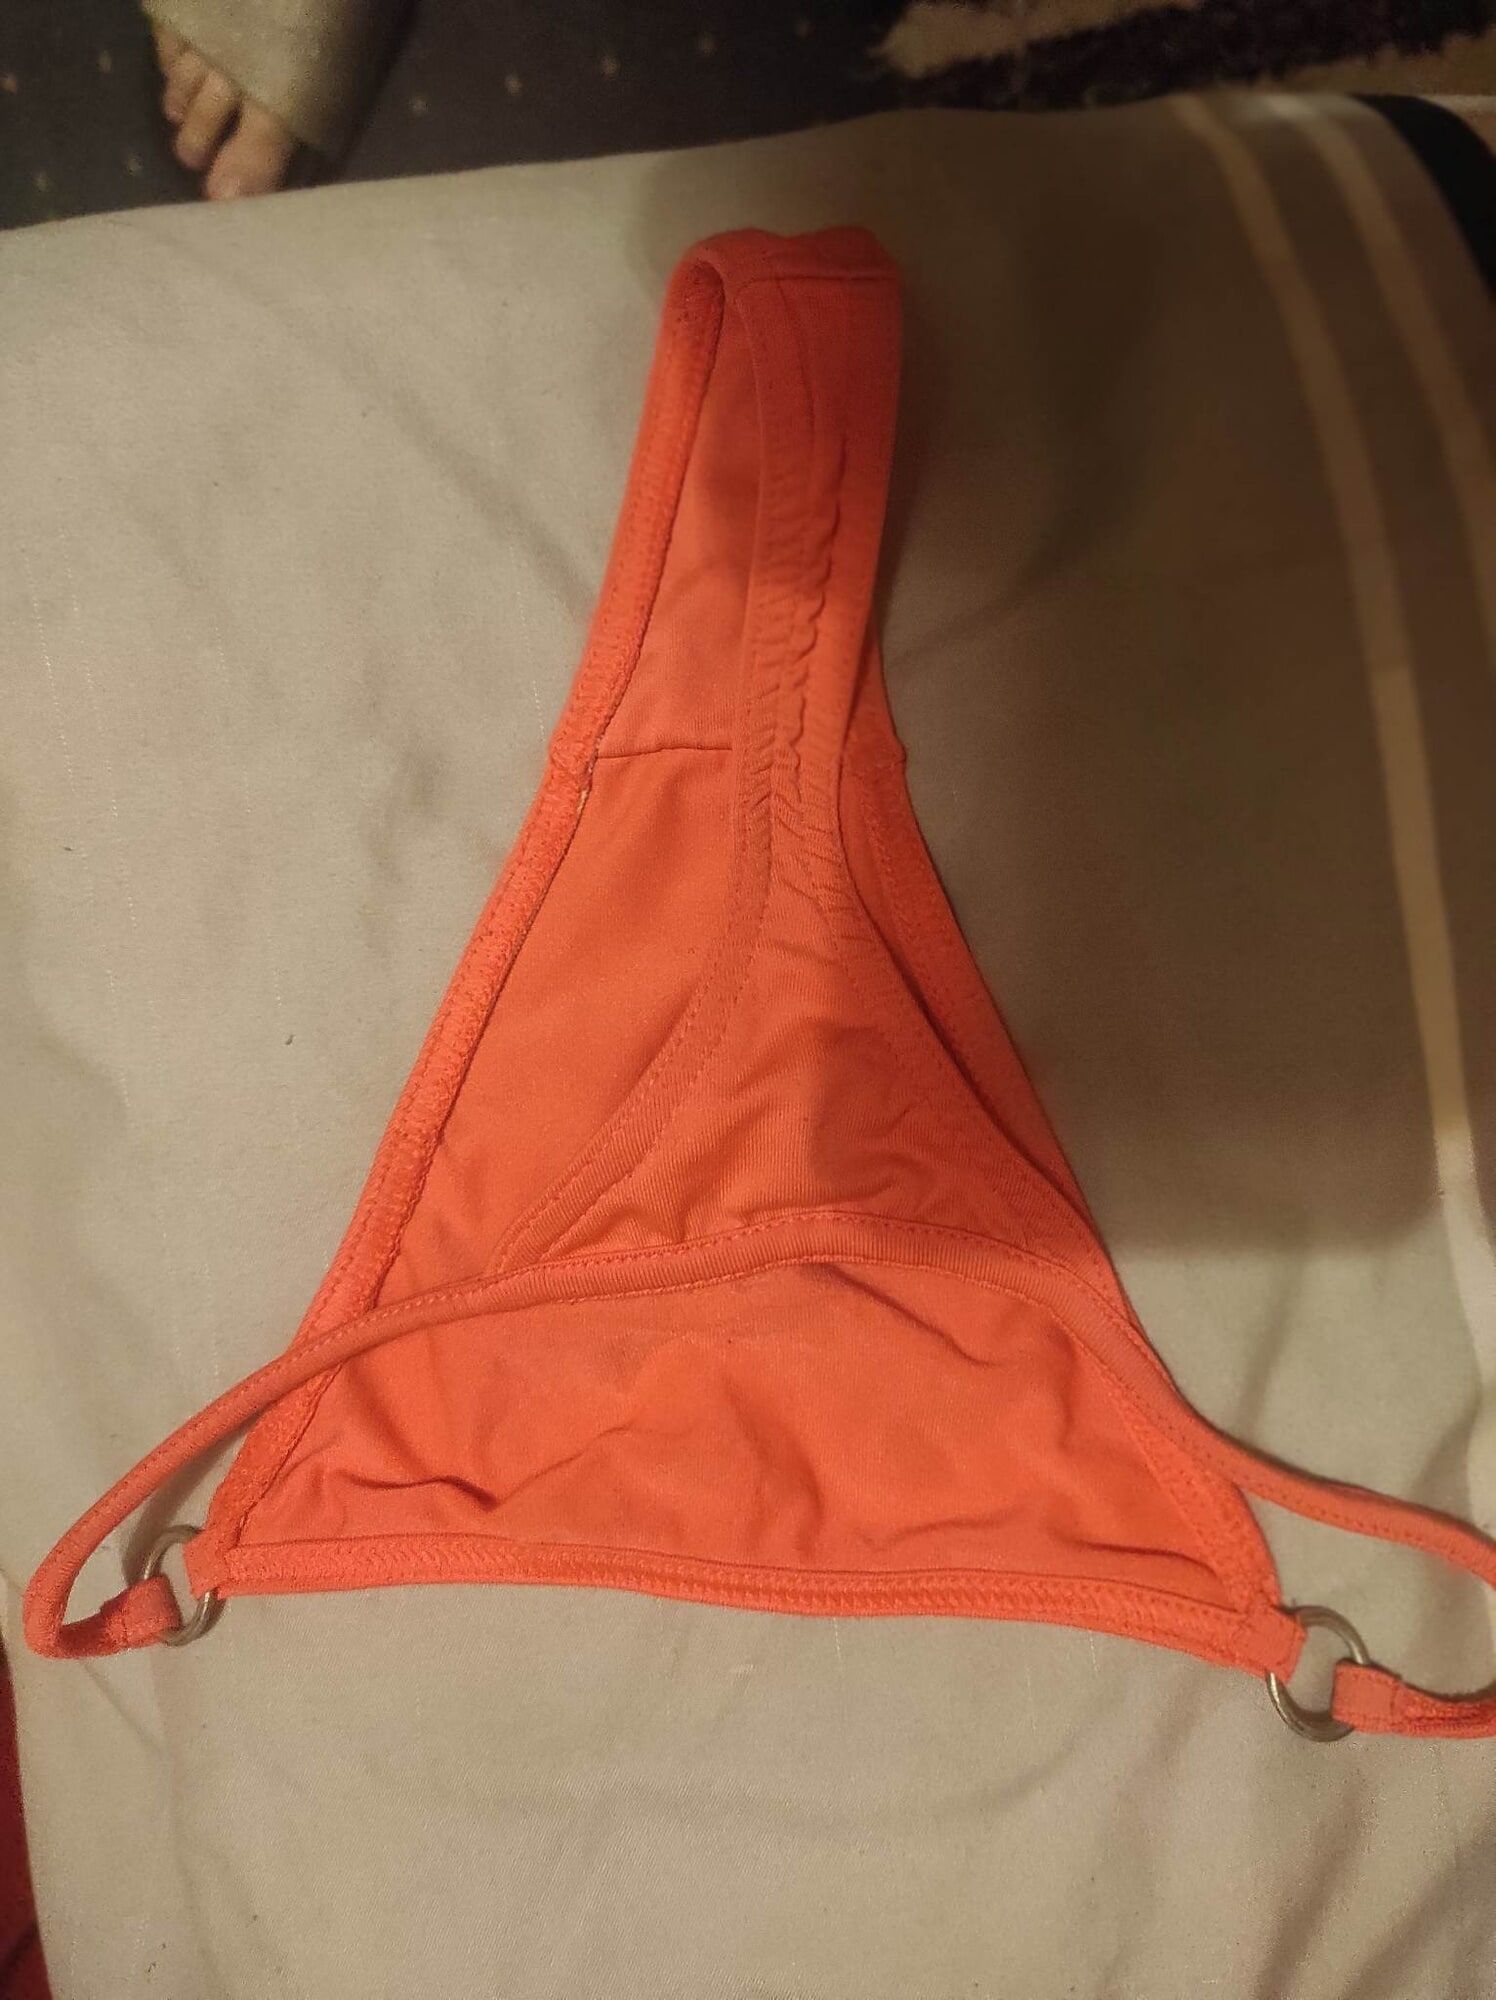 my friend's daughter is a thong 